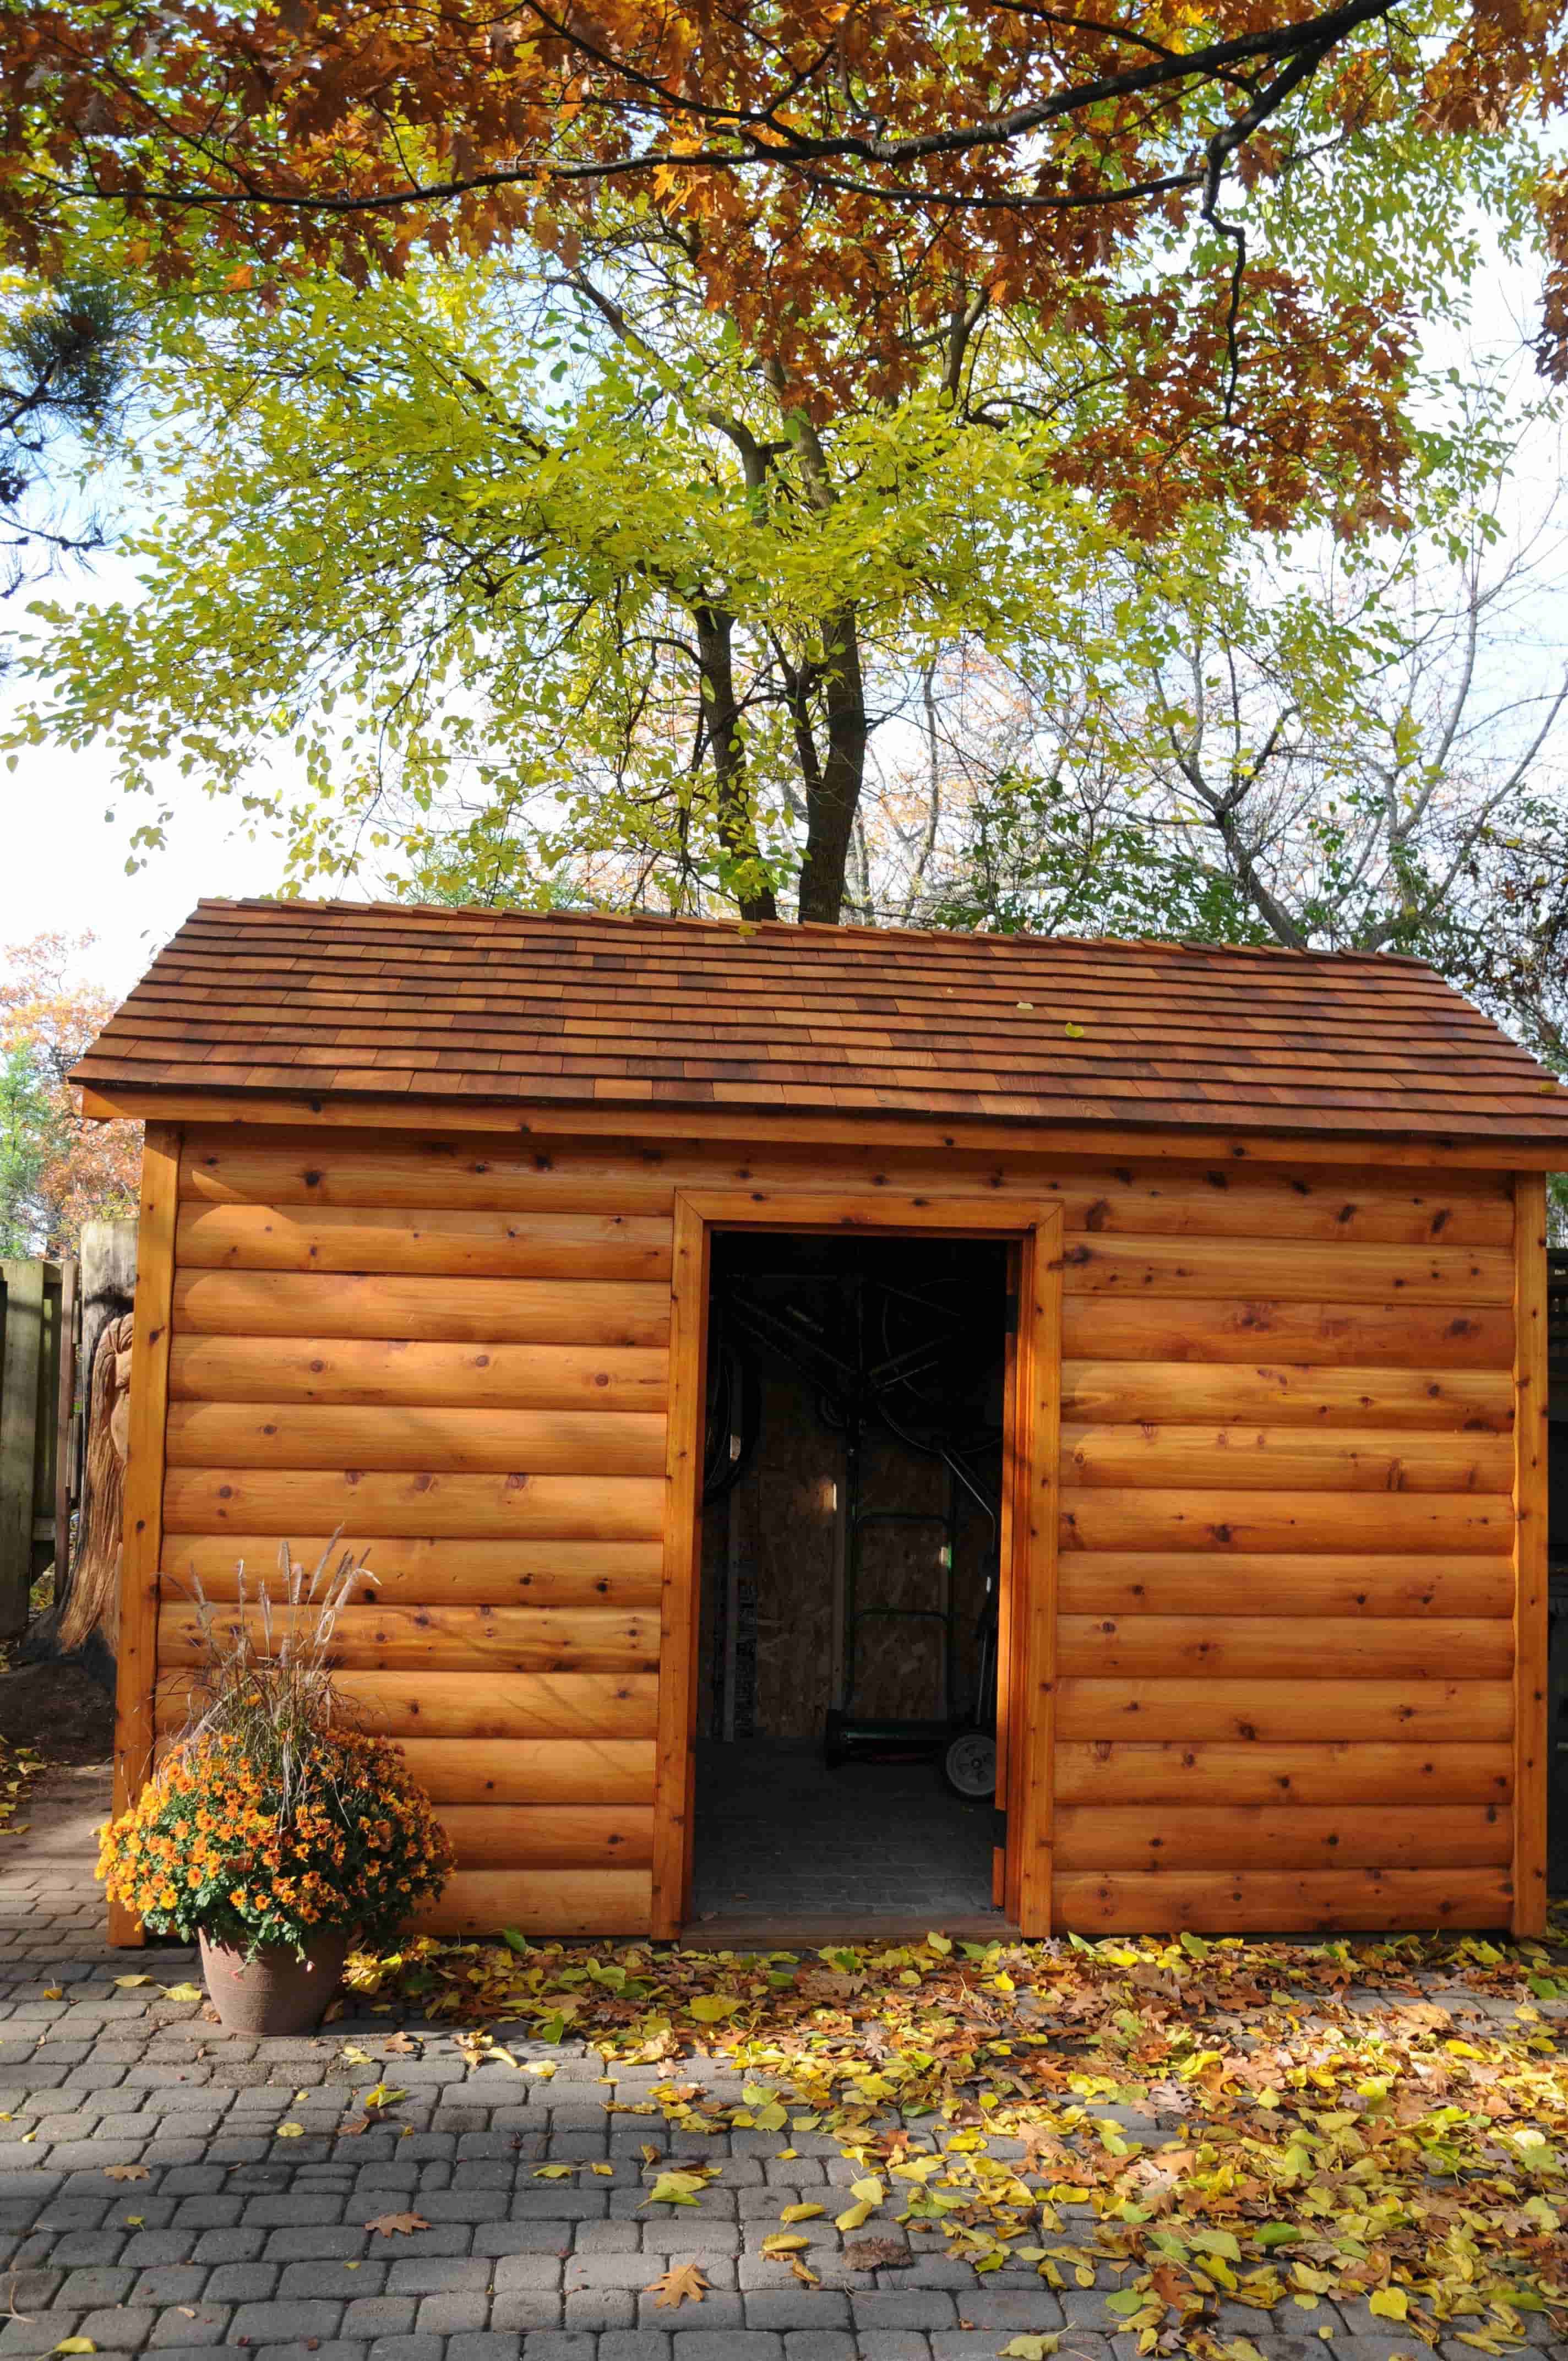 Palmerston garden shed 7x12 with cedar shingles in Toronto Ontario. ID number 184210-3..